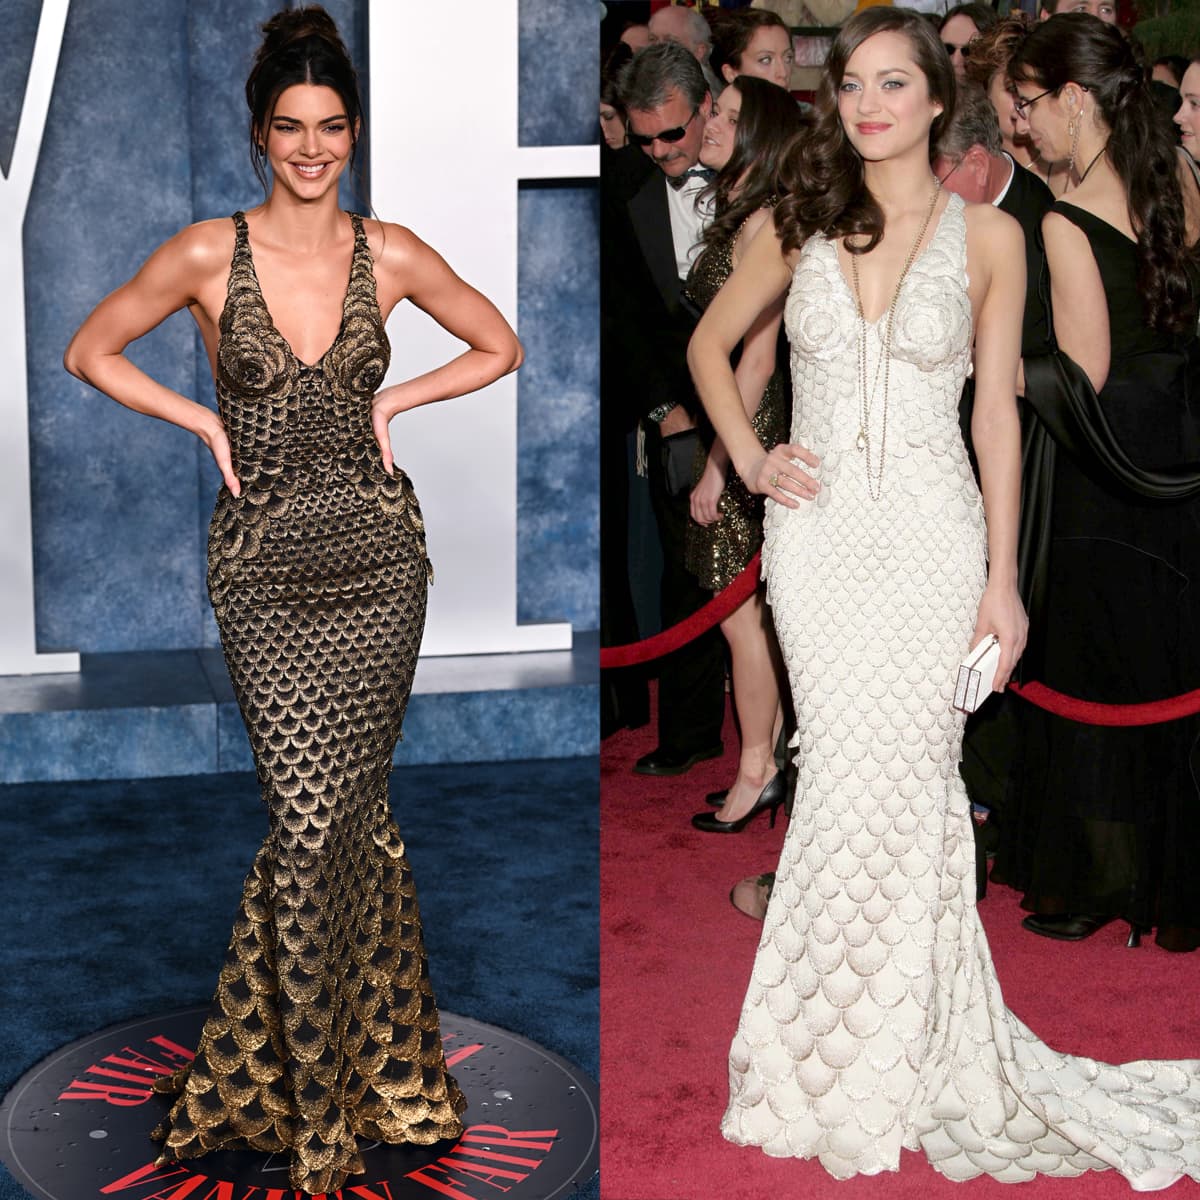 Kendall Jenner is wearing the same Jean Paul Gaultier gown that Marion Cotillard wore when she won the 2008 Oscars Best Actress for La Vie en Rose